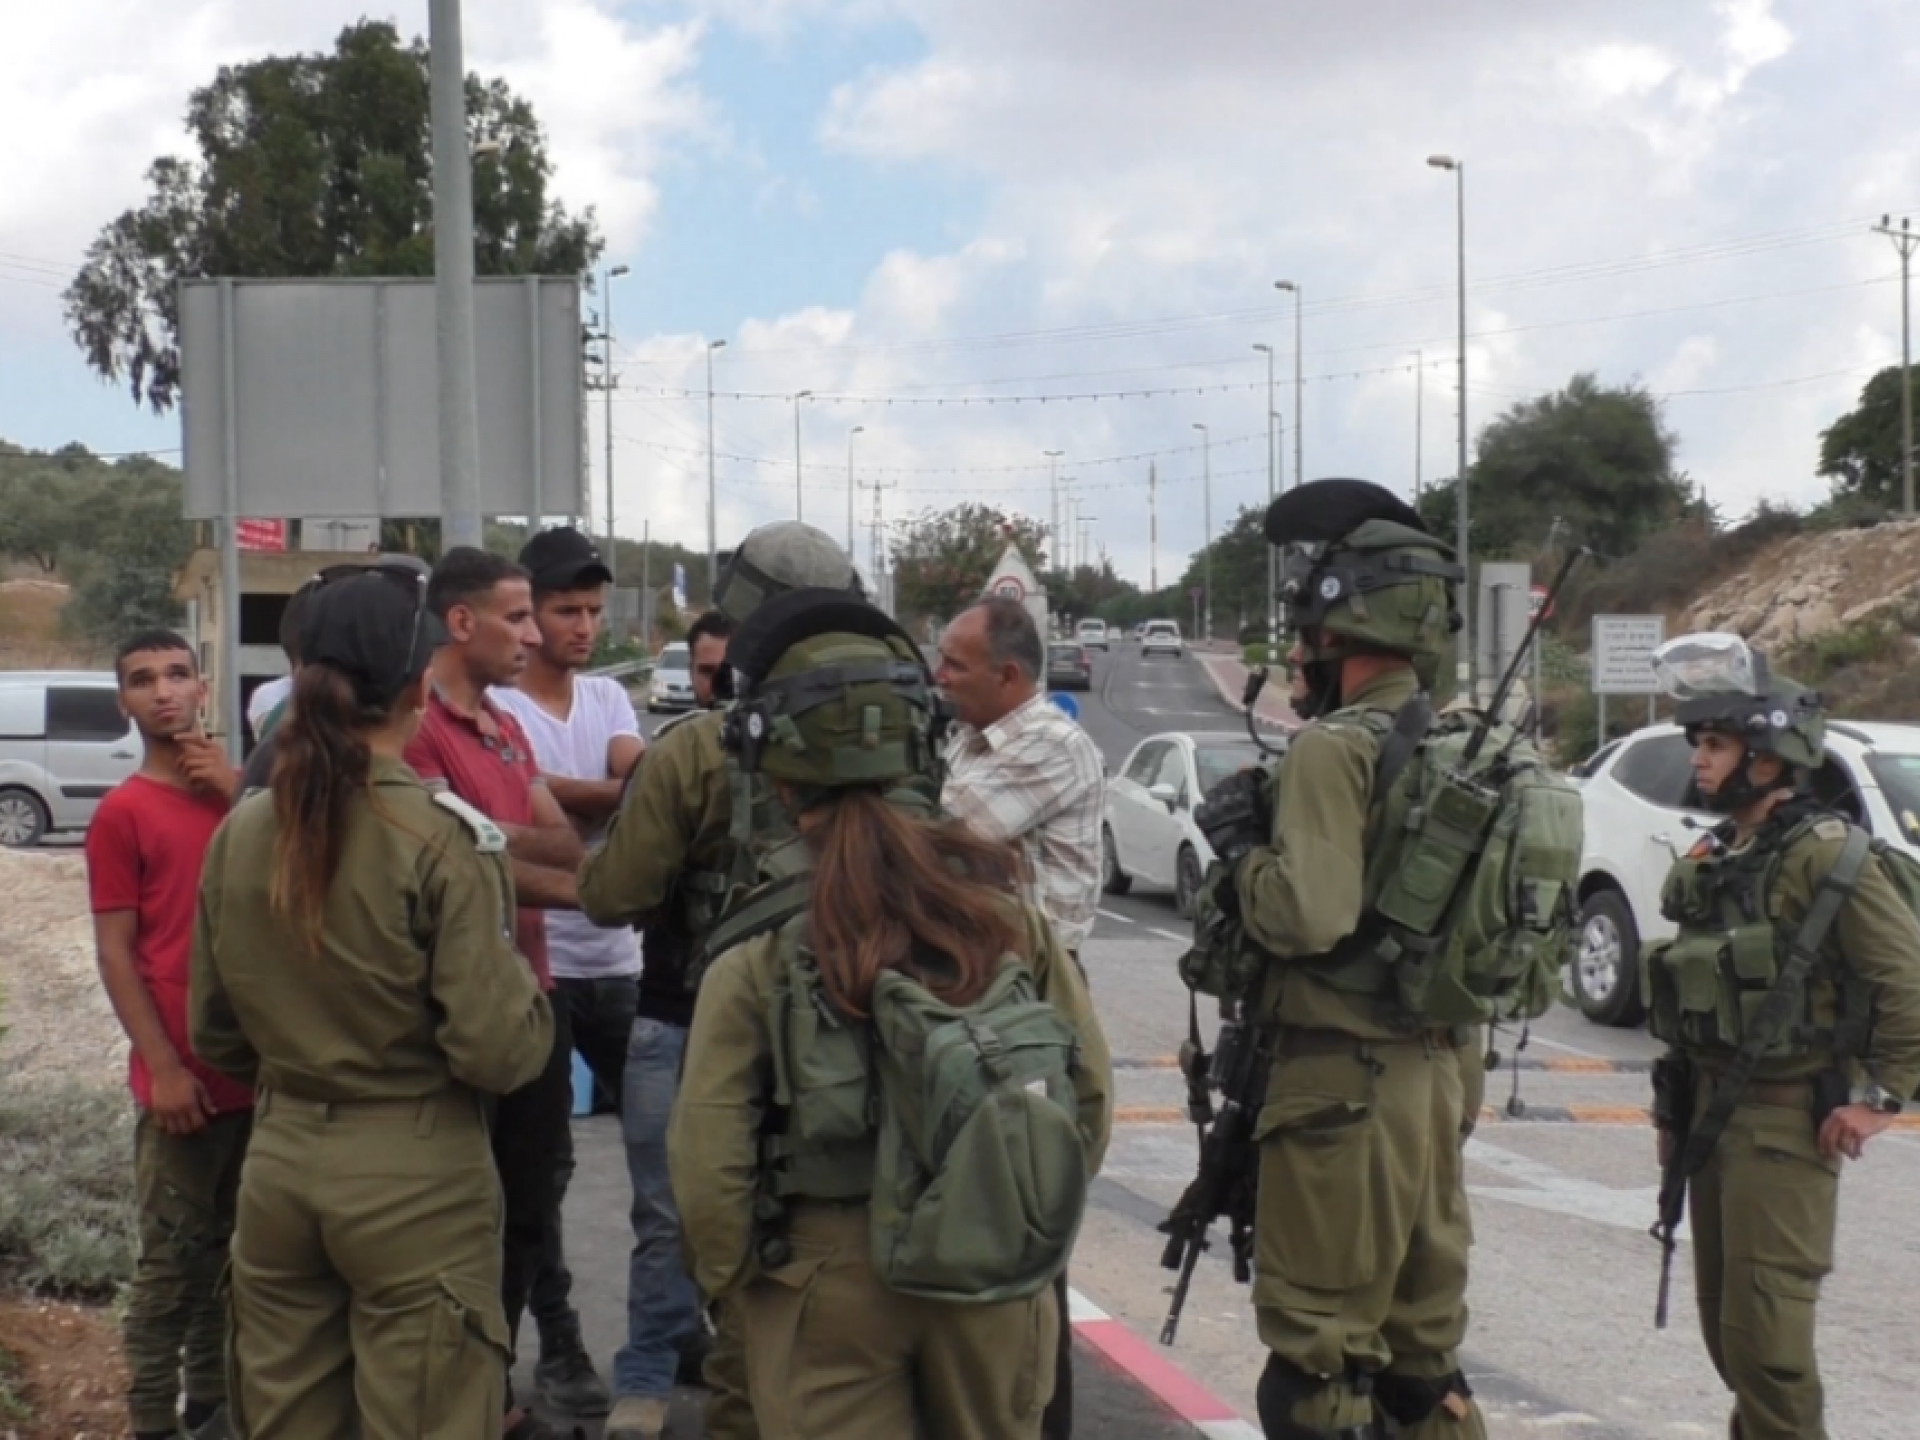 A discussion ensued between the uniformed personnel and the Palestinians and activists